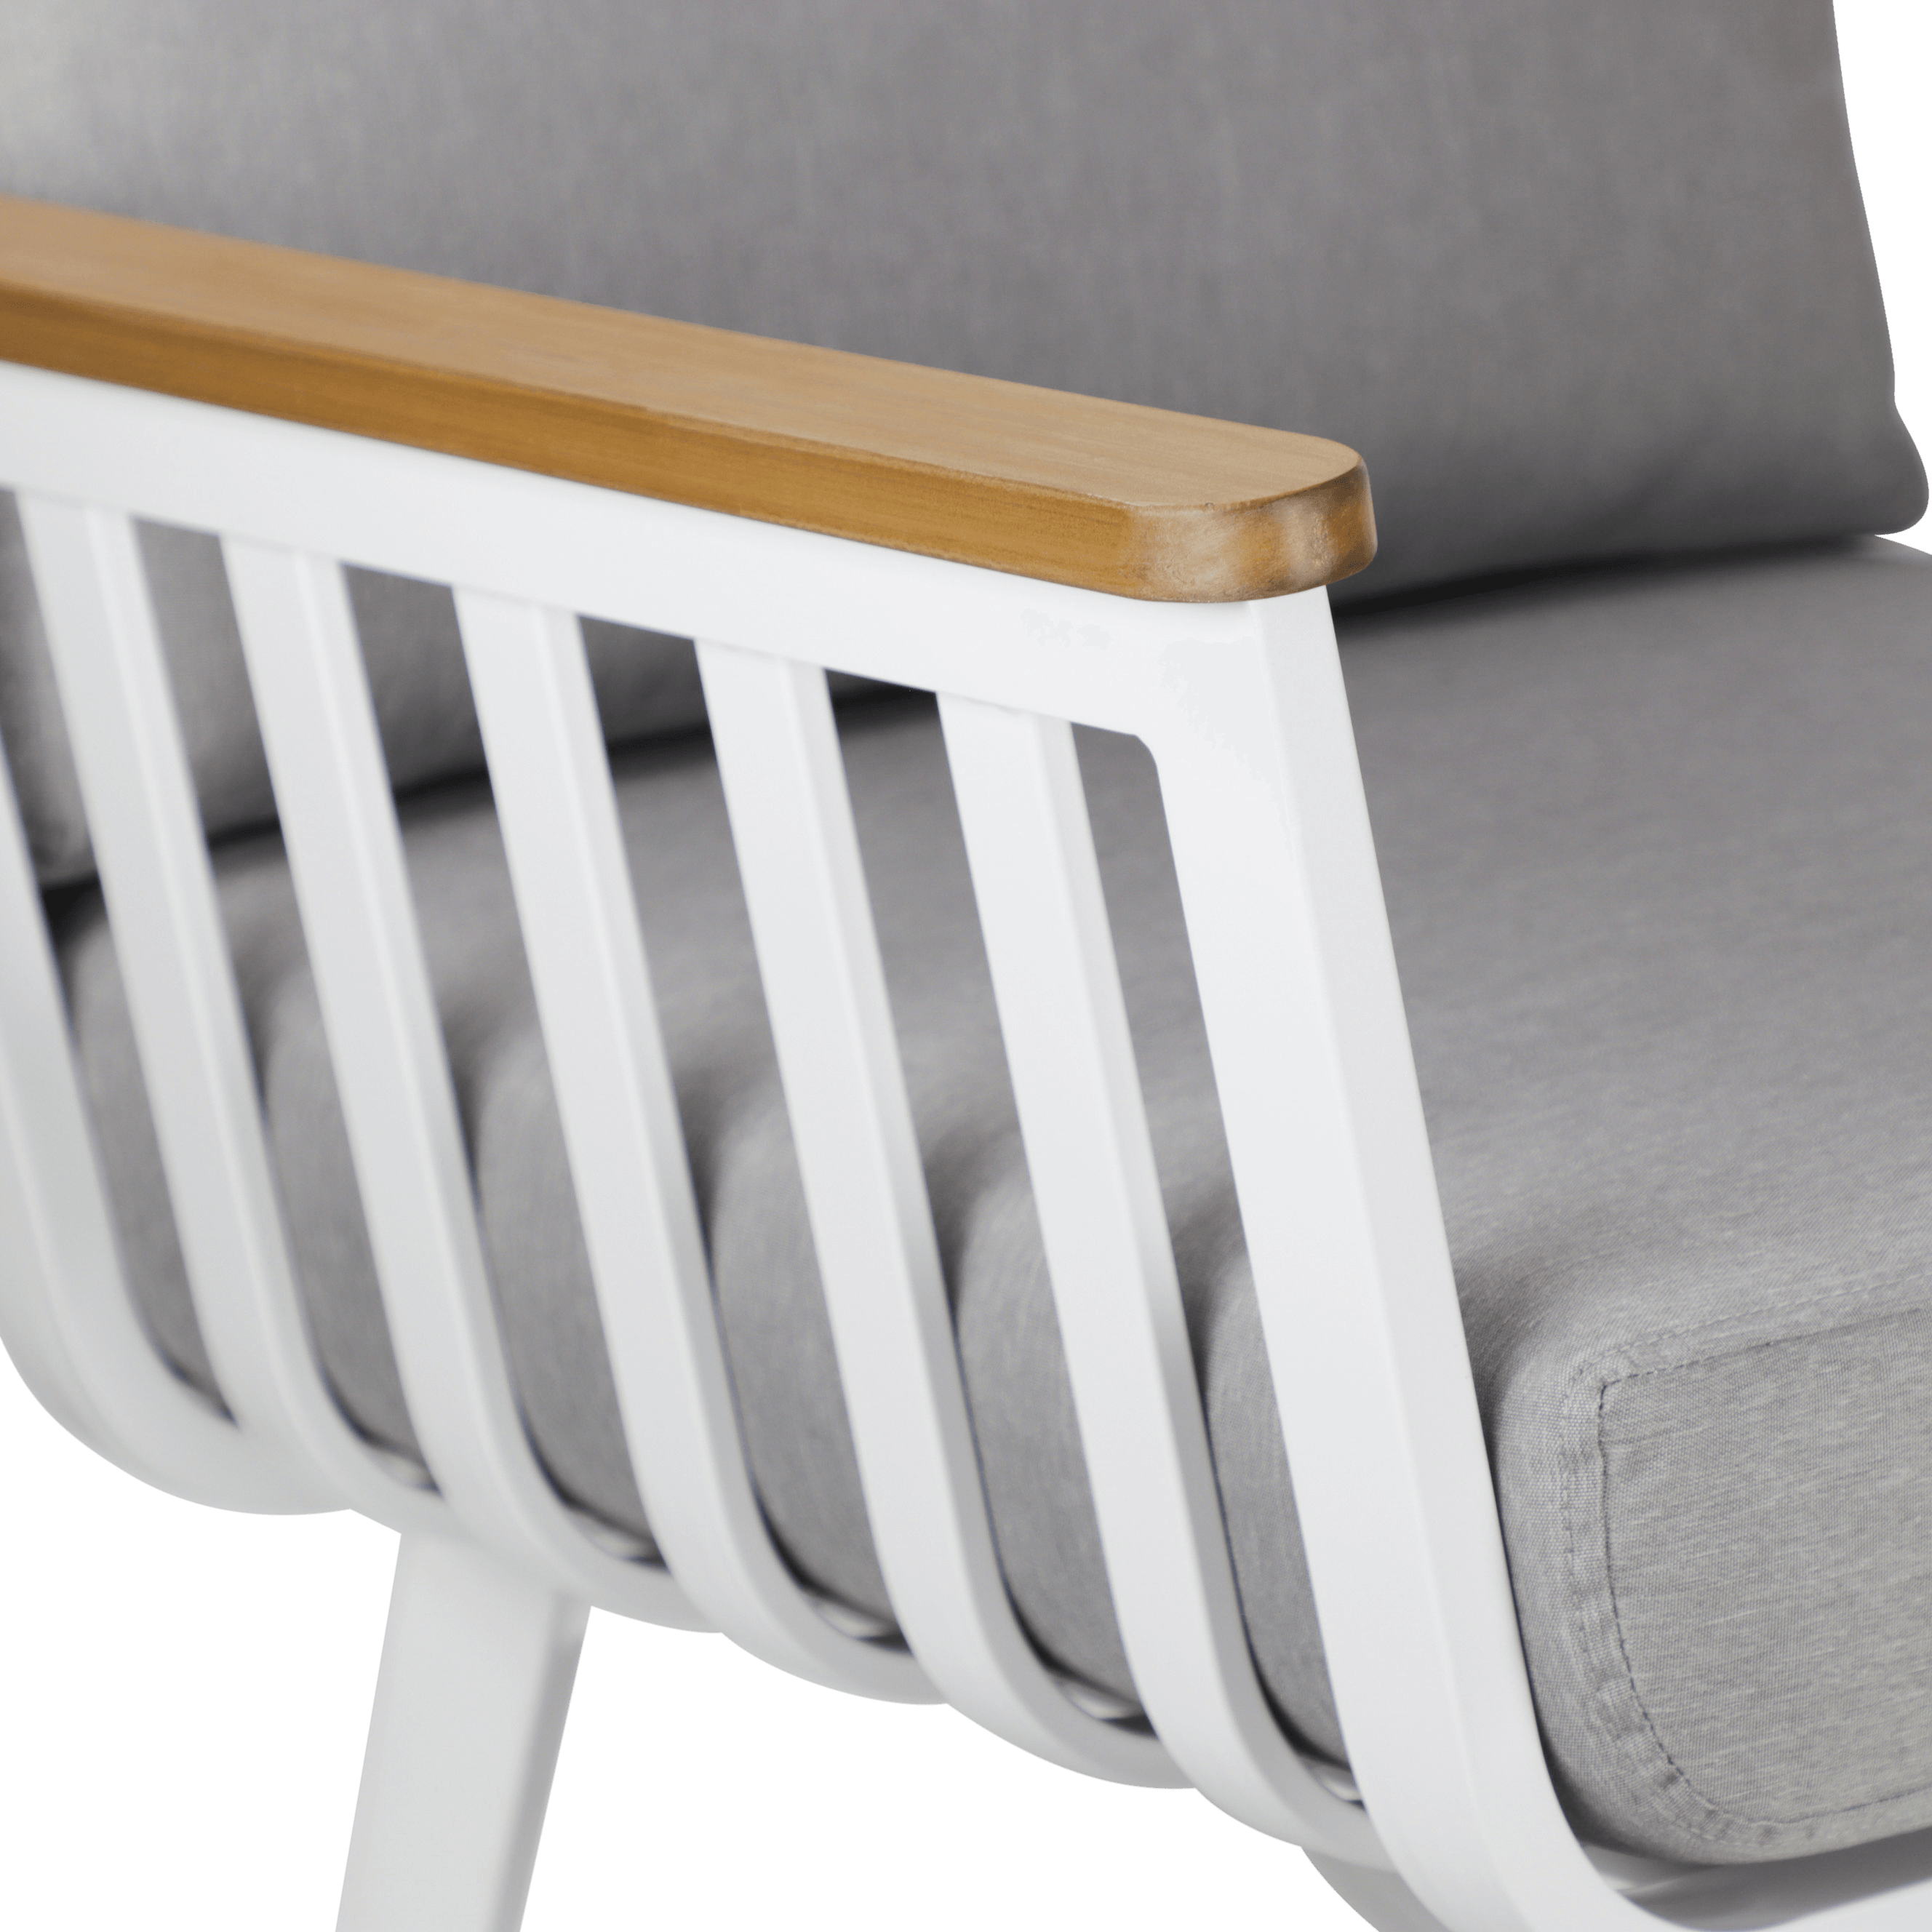 Sorrento Rocker 3pc Occasional Set in Arctic White with Polywood Teak Accent and Spuncrylic Stone Grey Cushions - The Furniture Shack